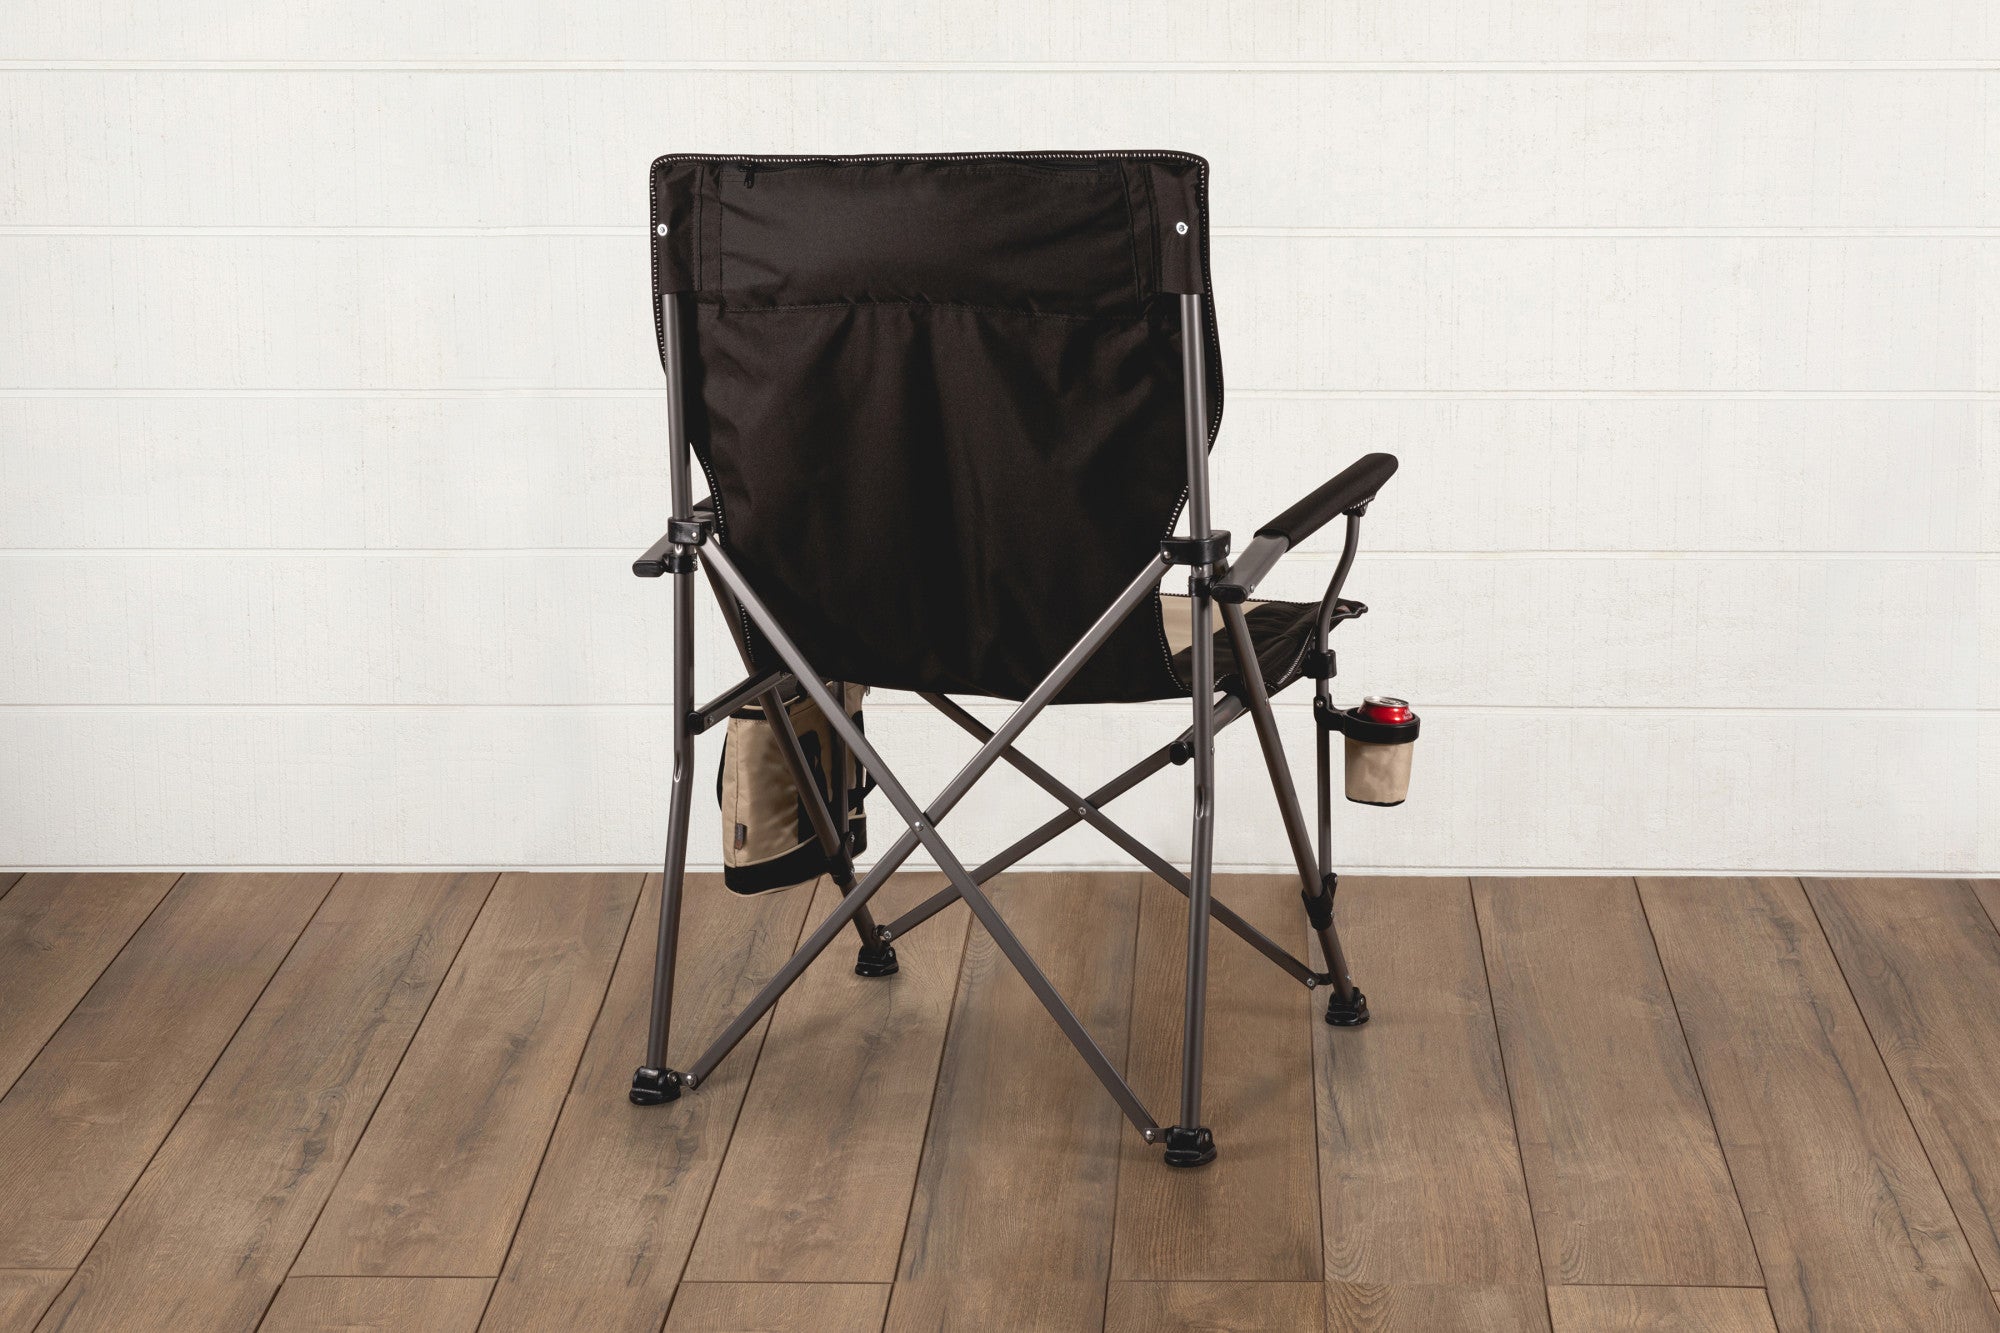 Houston Texans - Big Bear XXL Camping Chair with Cooler